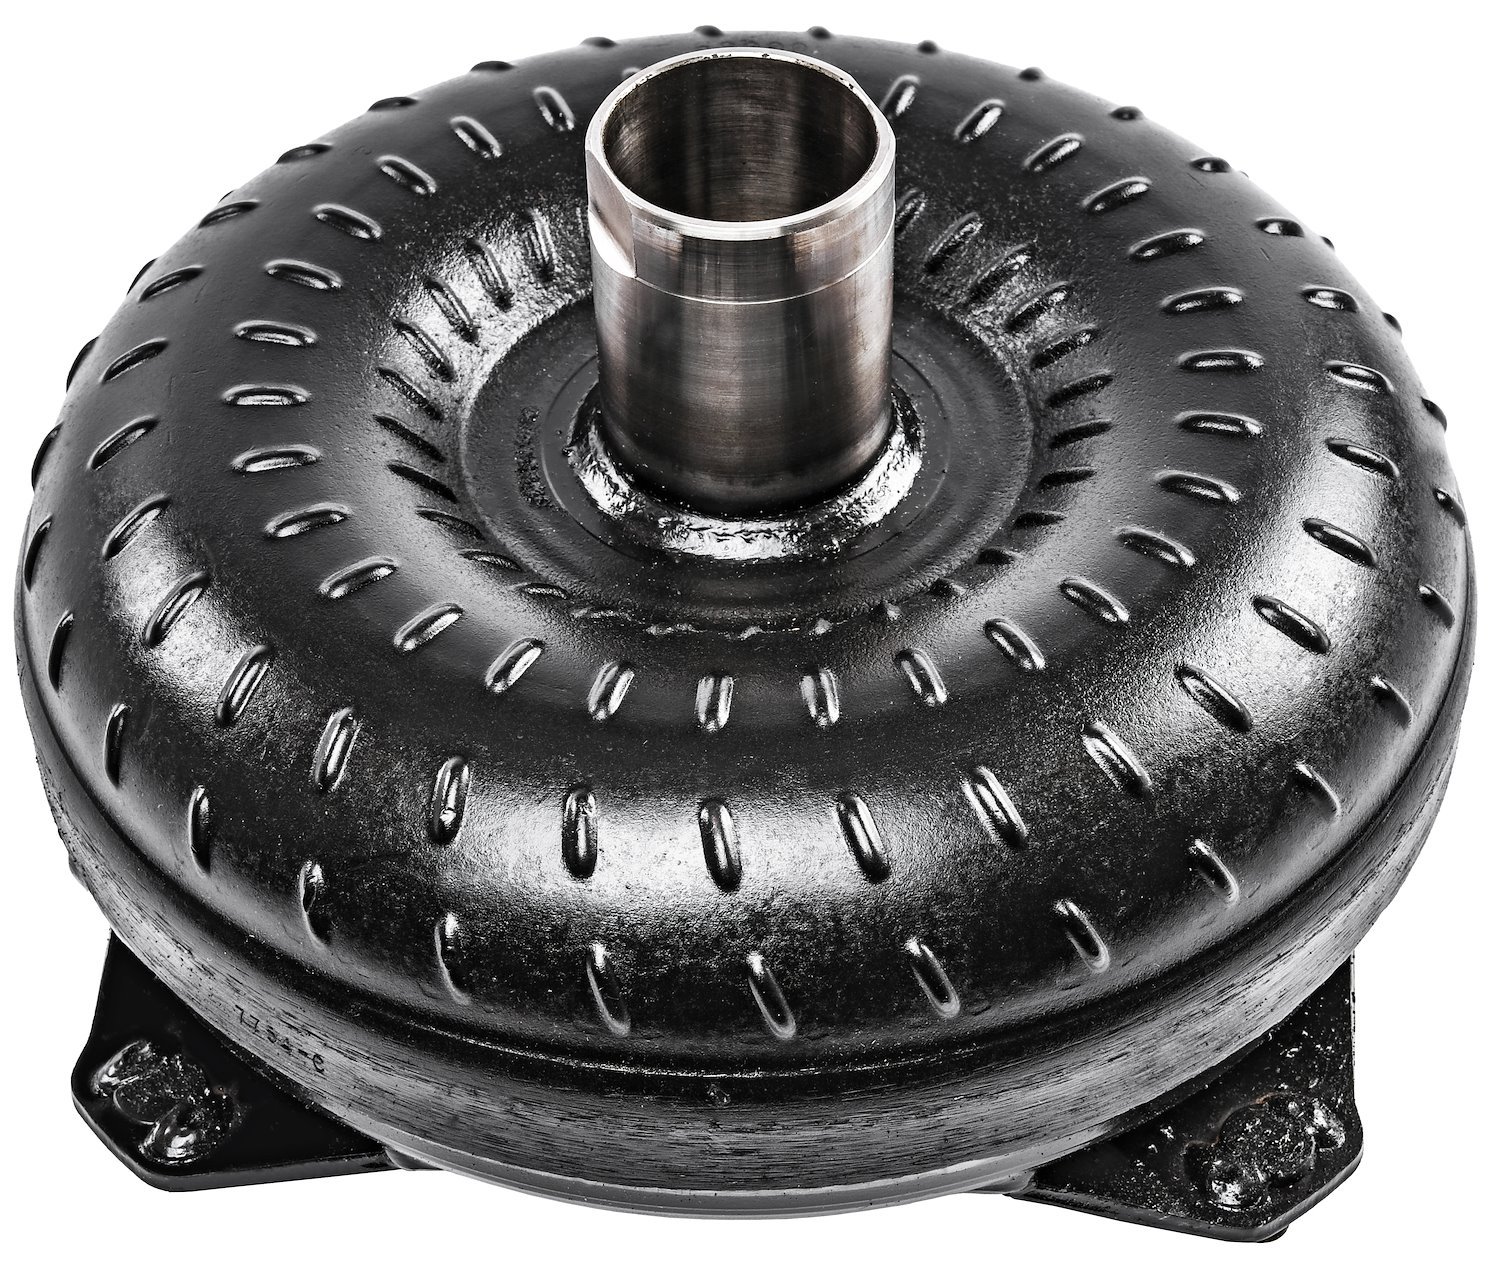 Torque Converter for Ford C4 [10 in. Dia. & 2300-2500 RPM Stall Speed]